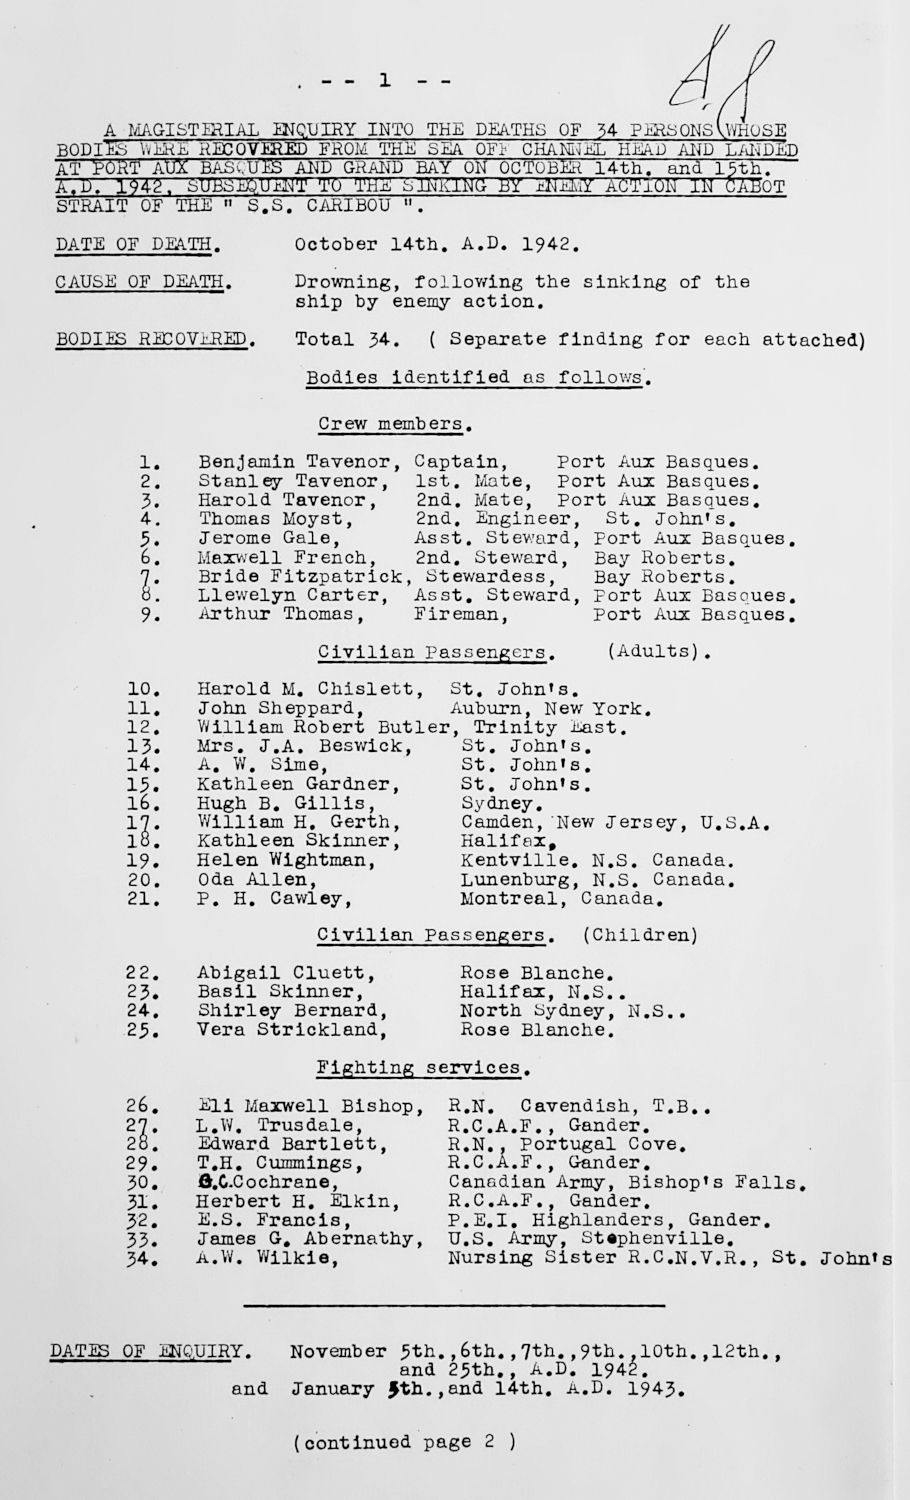 Typed list of the identities of 34 bodies recovered from the sinking of S.S. Caribou